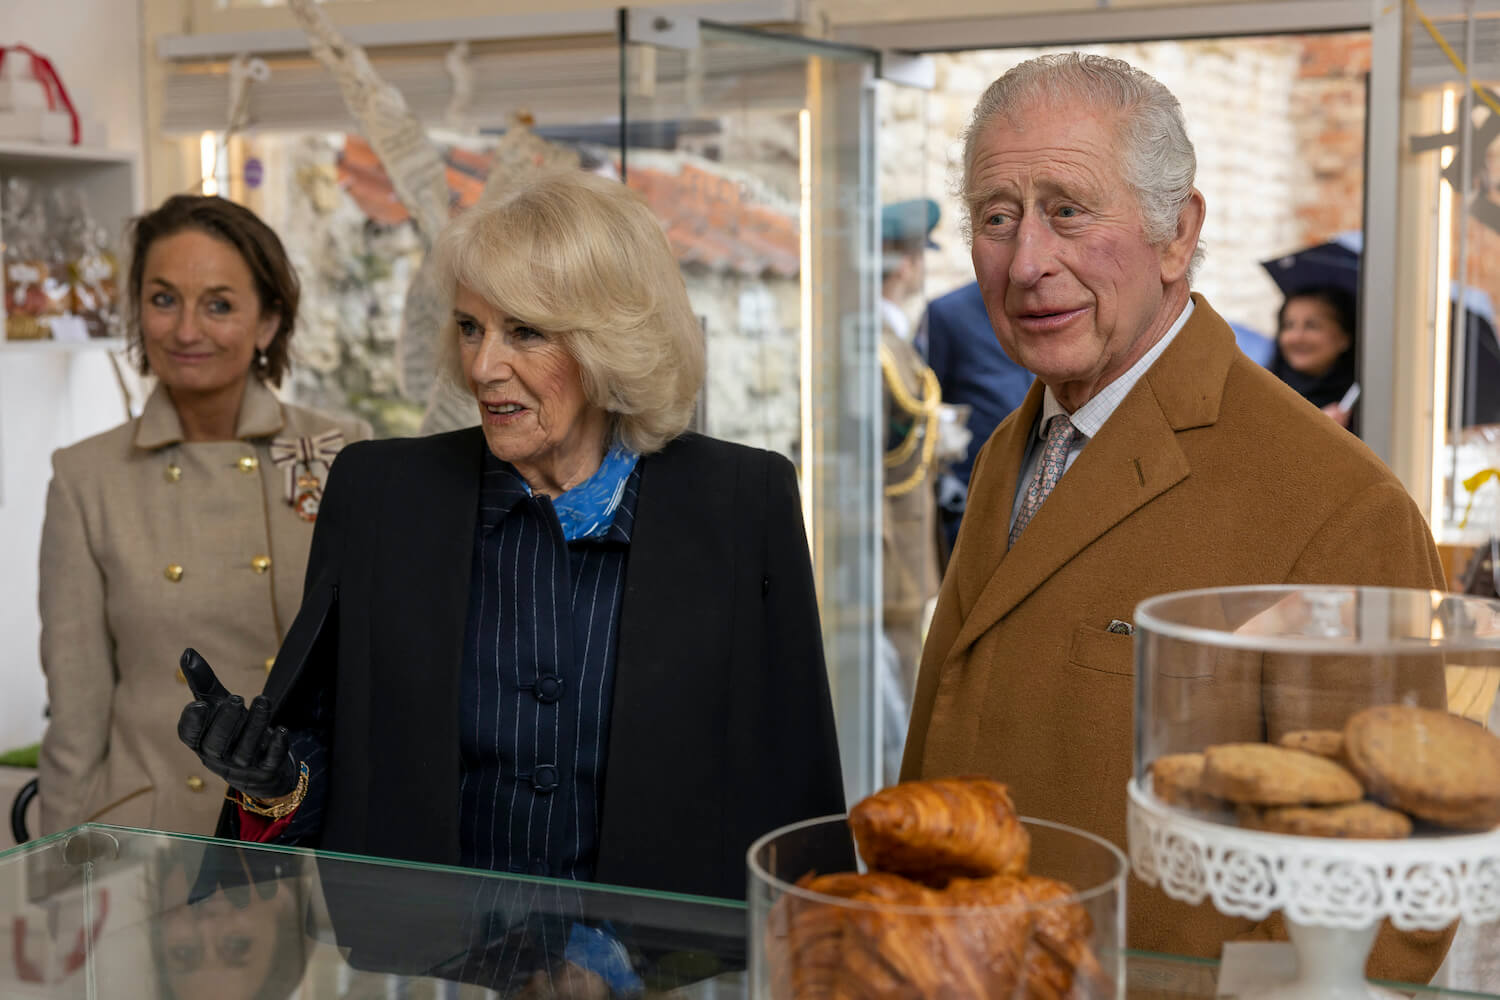 King Charles wearing a brown coat and Queen Camilla wearing a dark coat stand at a bakery counter